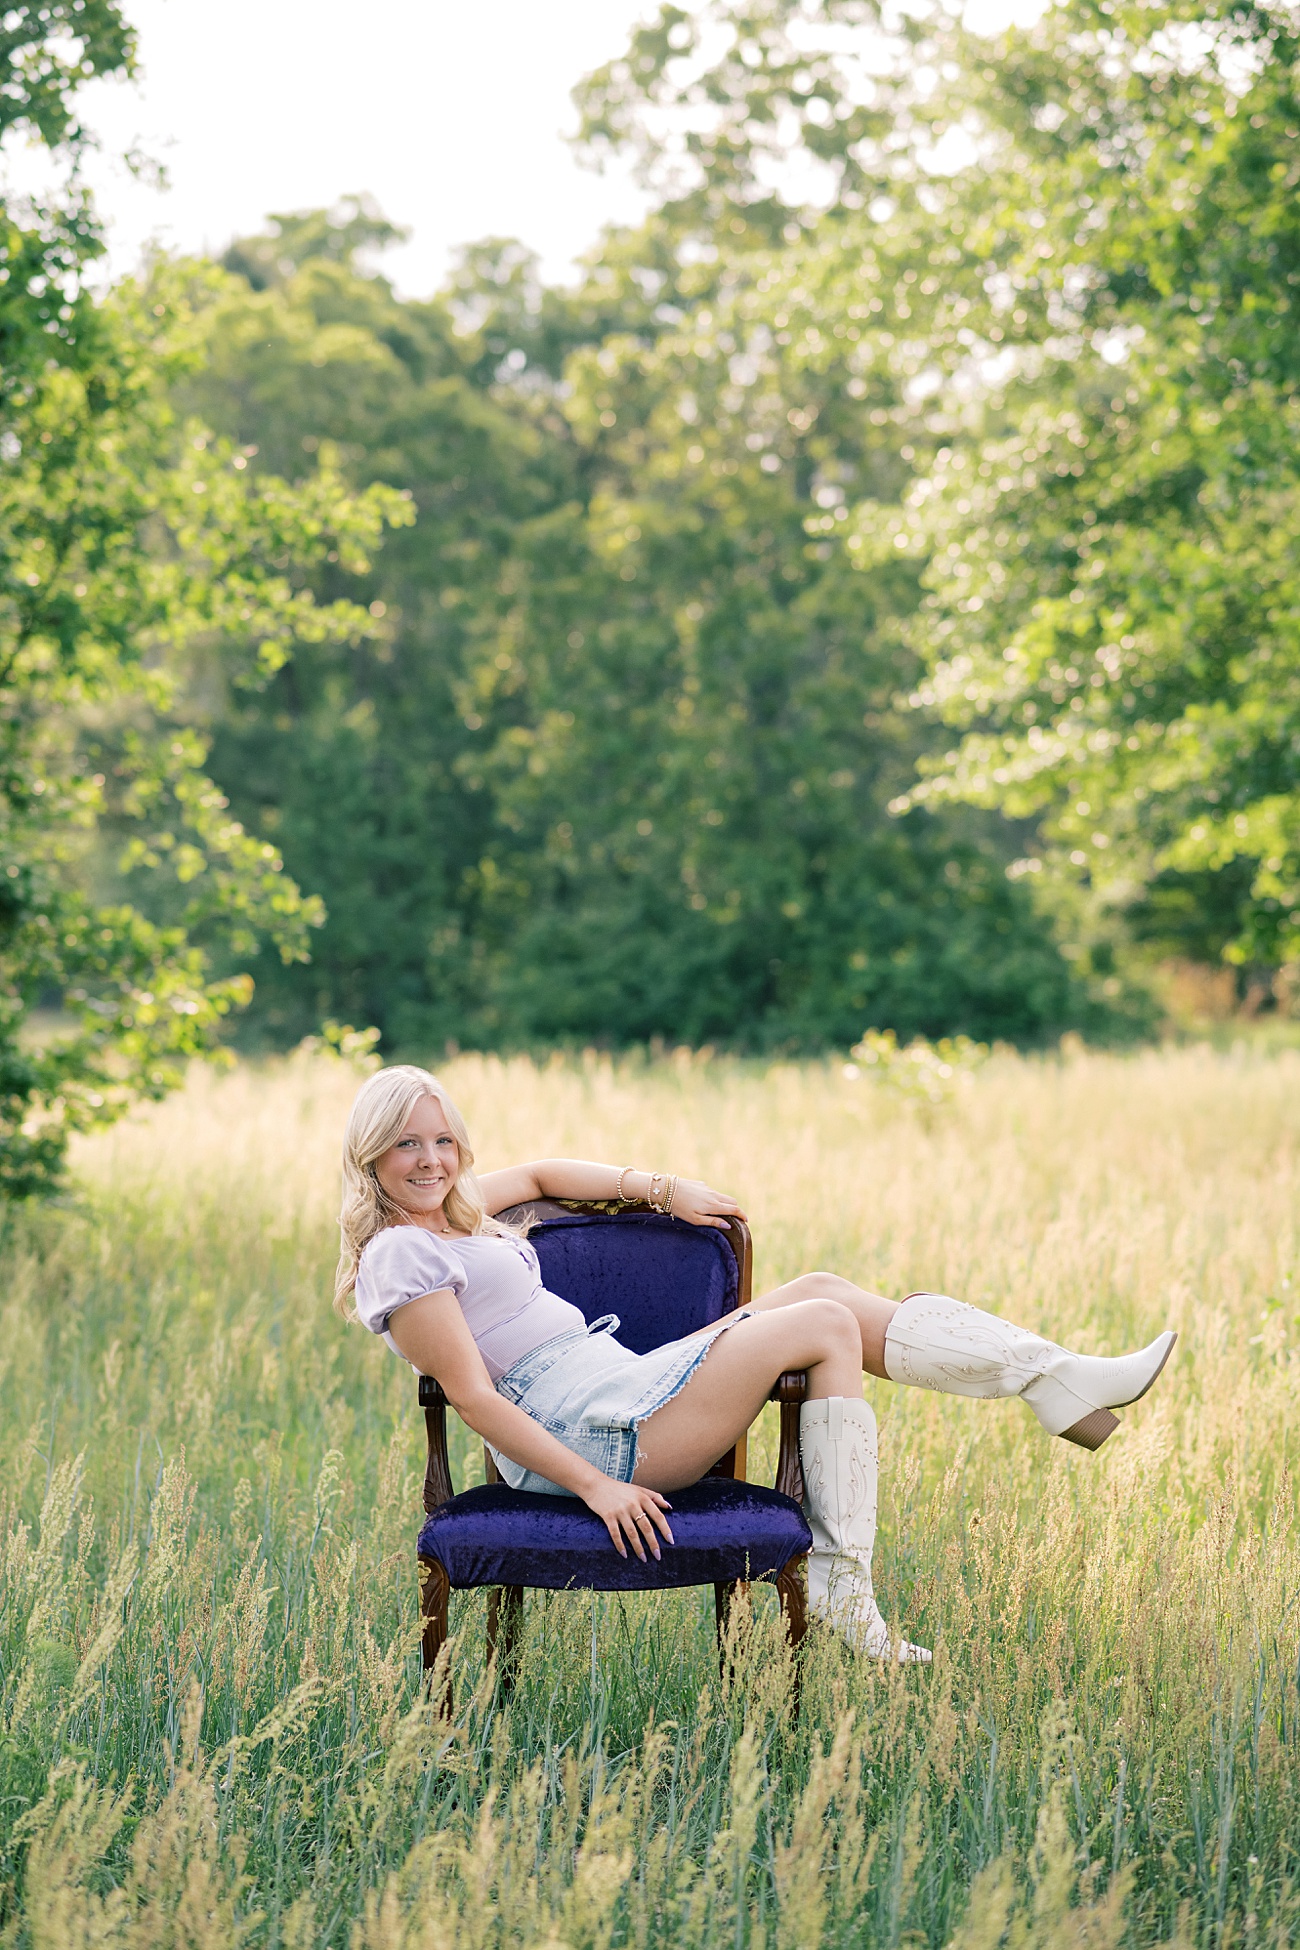 Bright and colorful outdoor senior portraits with vintage purple chair